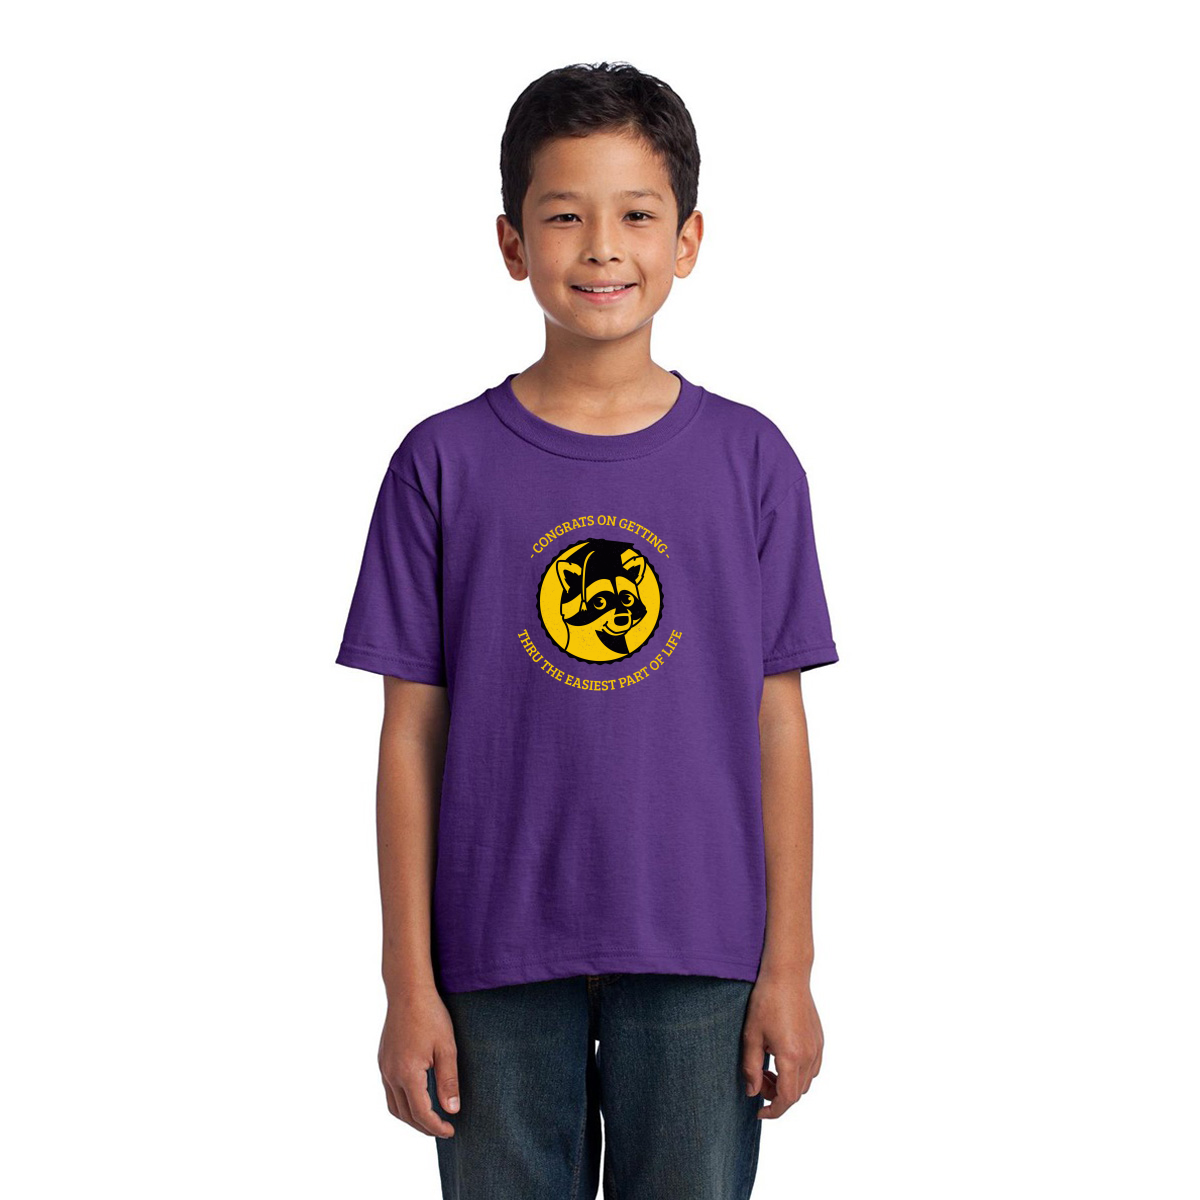 Congrats On Getting Thru The Easiest Part Of Life Kids T-shirt | Purple